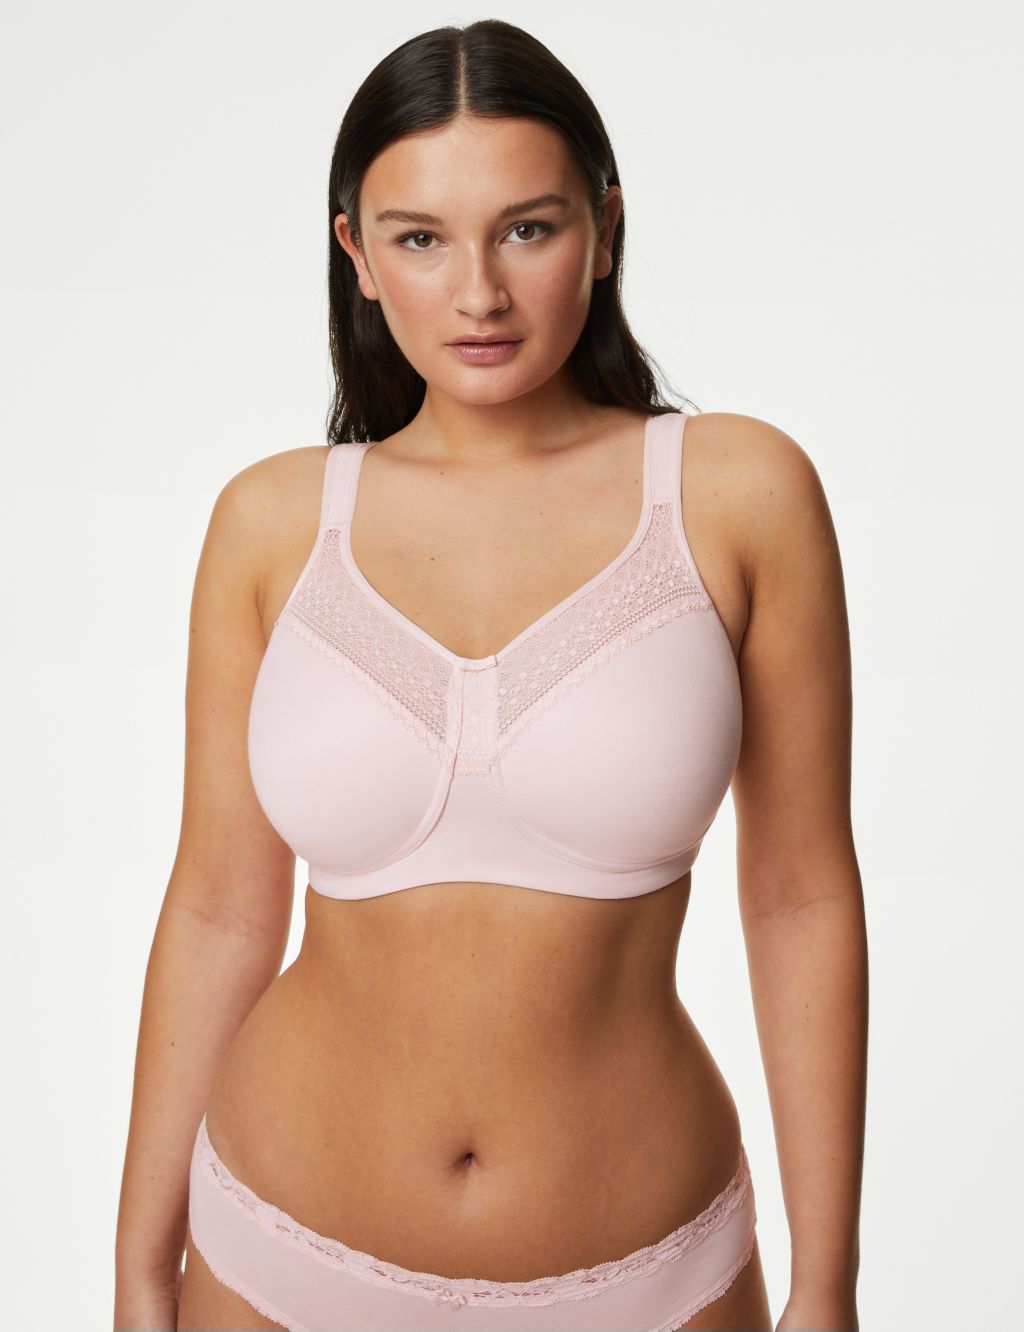 Cotton Blend & Lace Non Wired Total Support Bra B-H